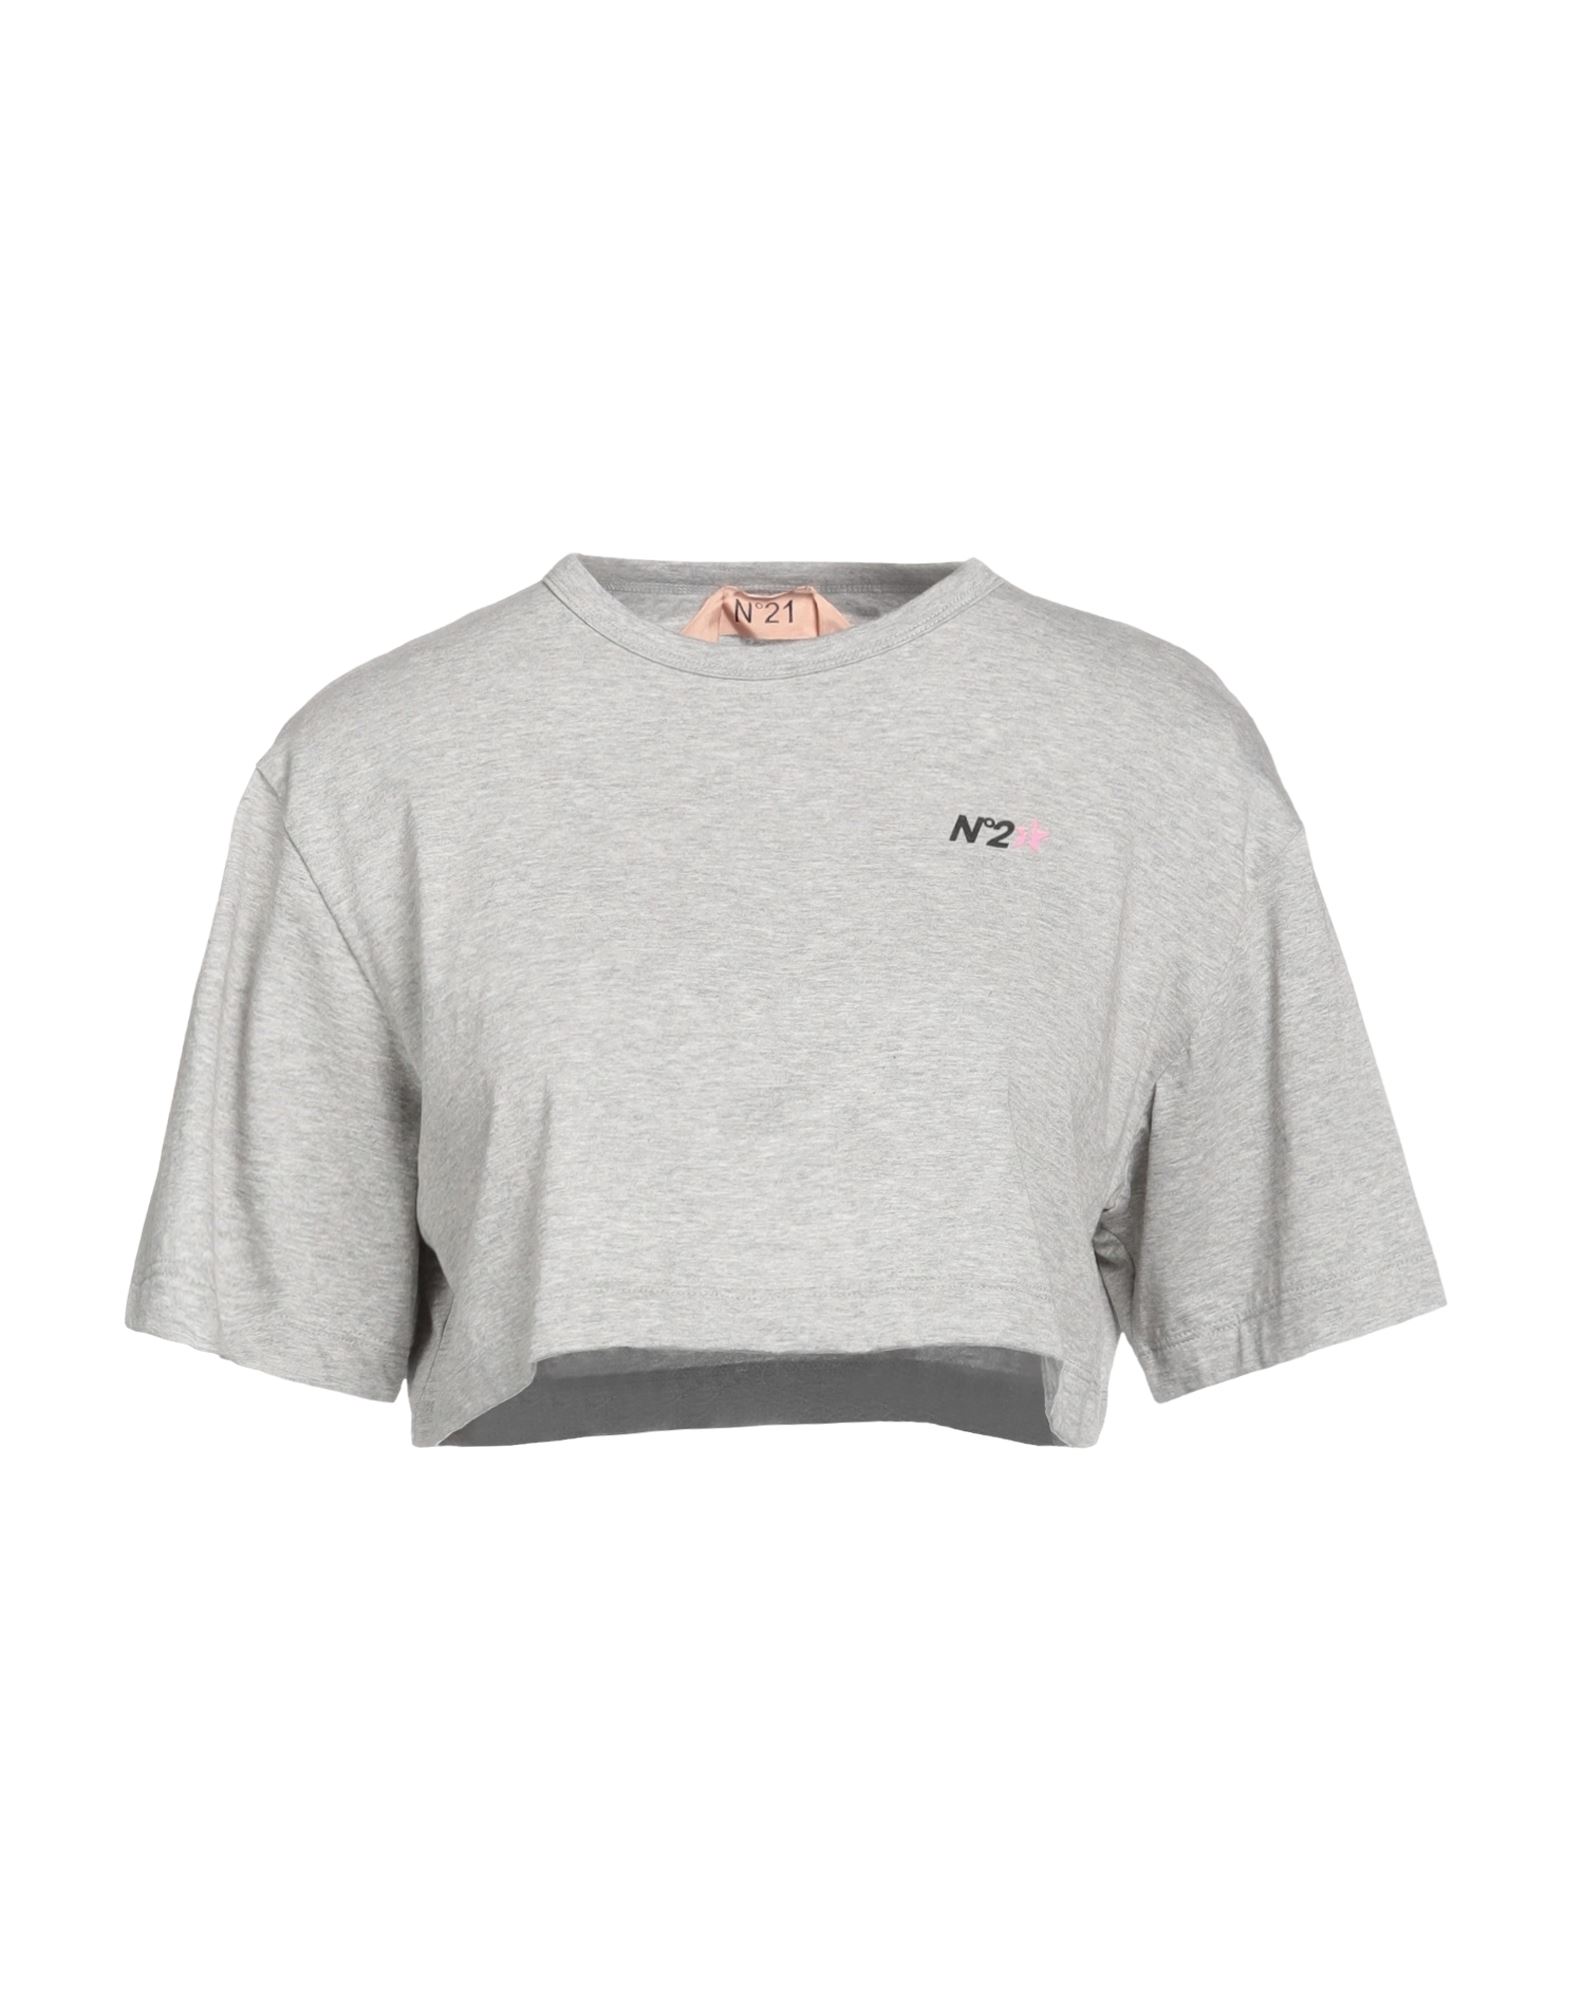 Ndegree21 T-shirts In Grey